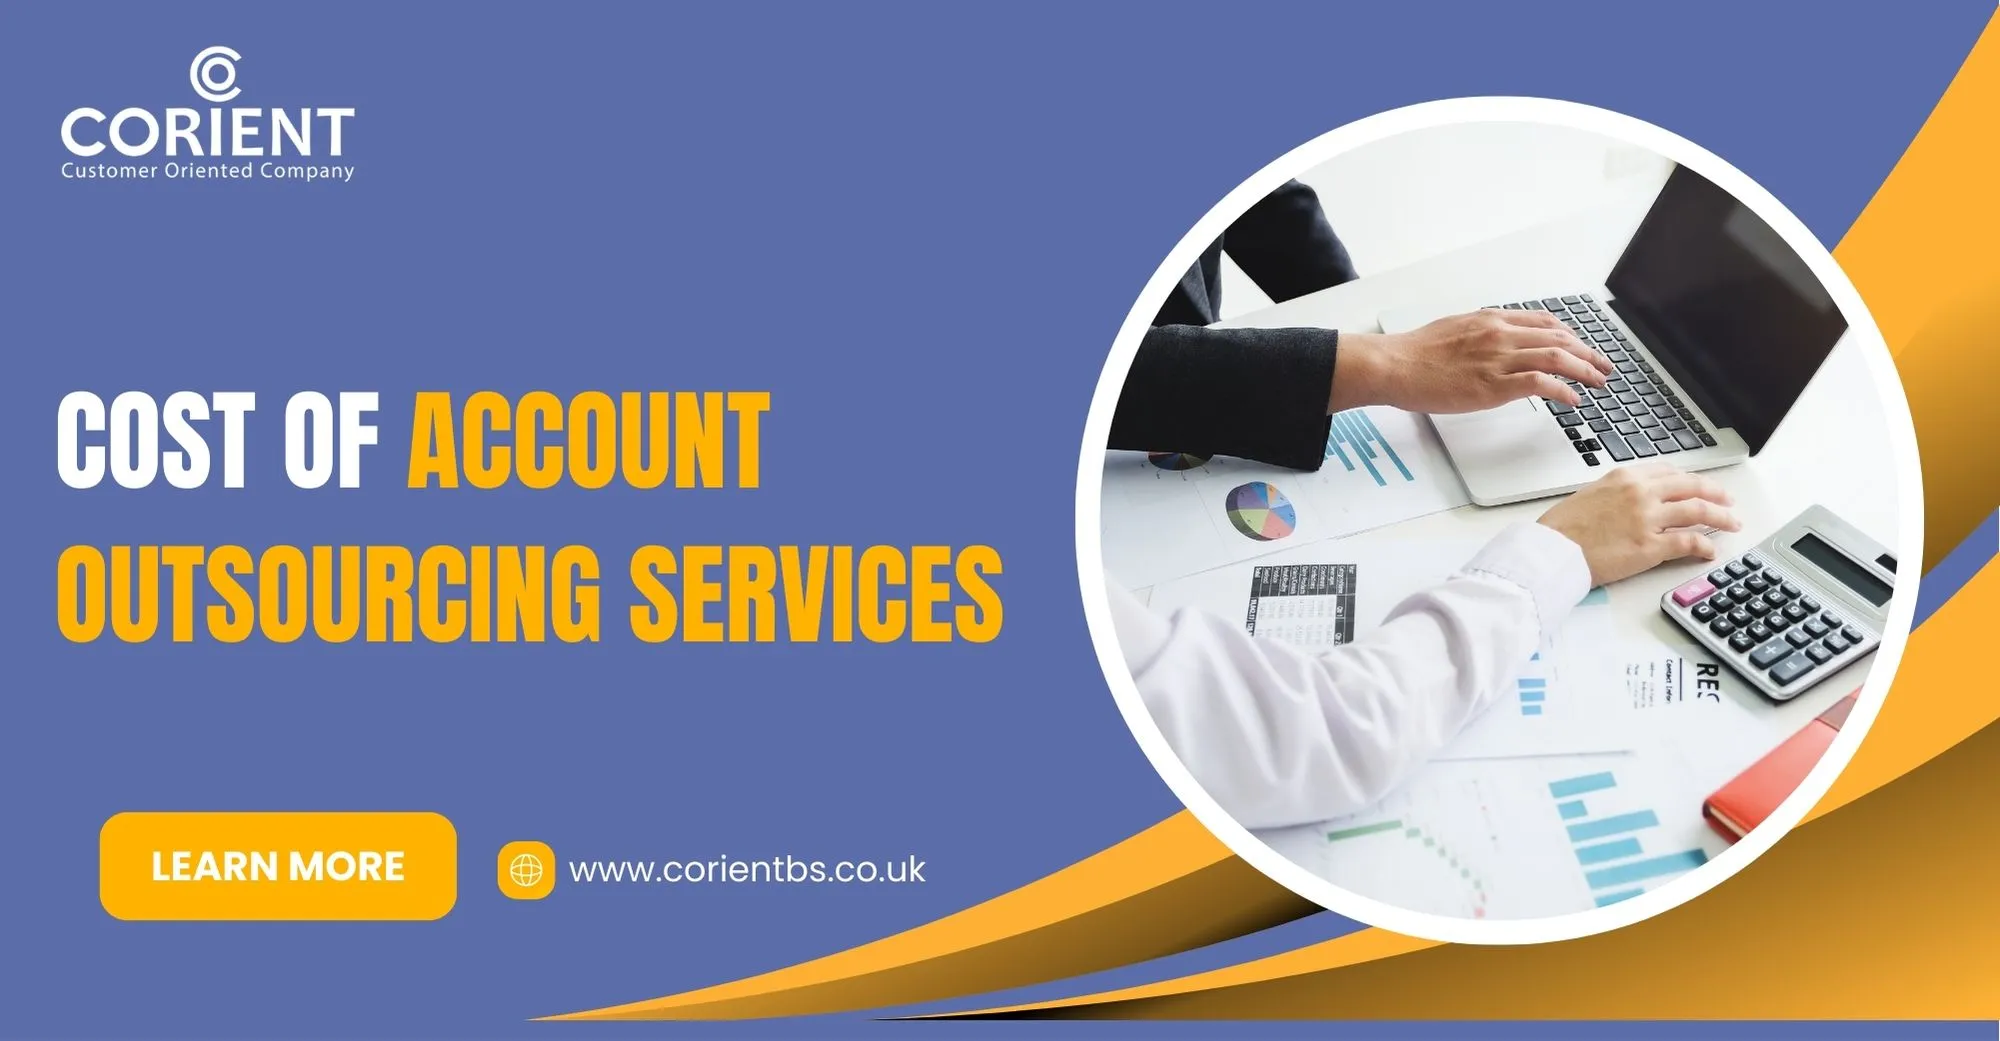 What Is the Actual Cost Of Account Outsourcing Services?